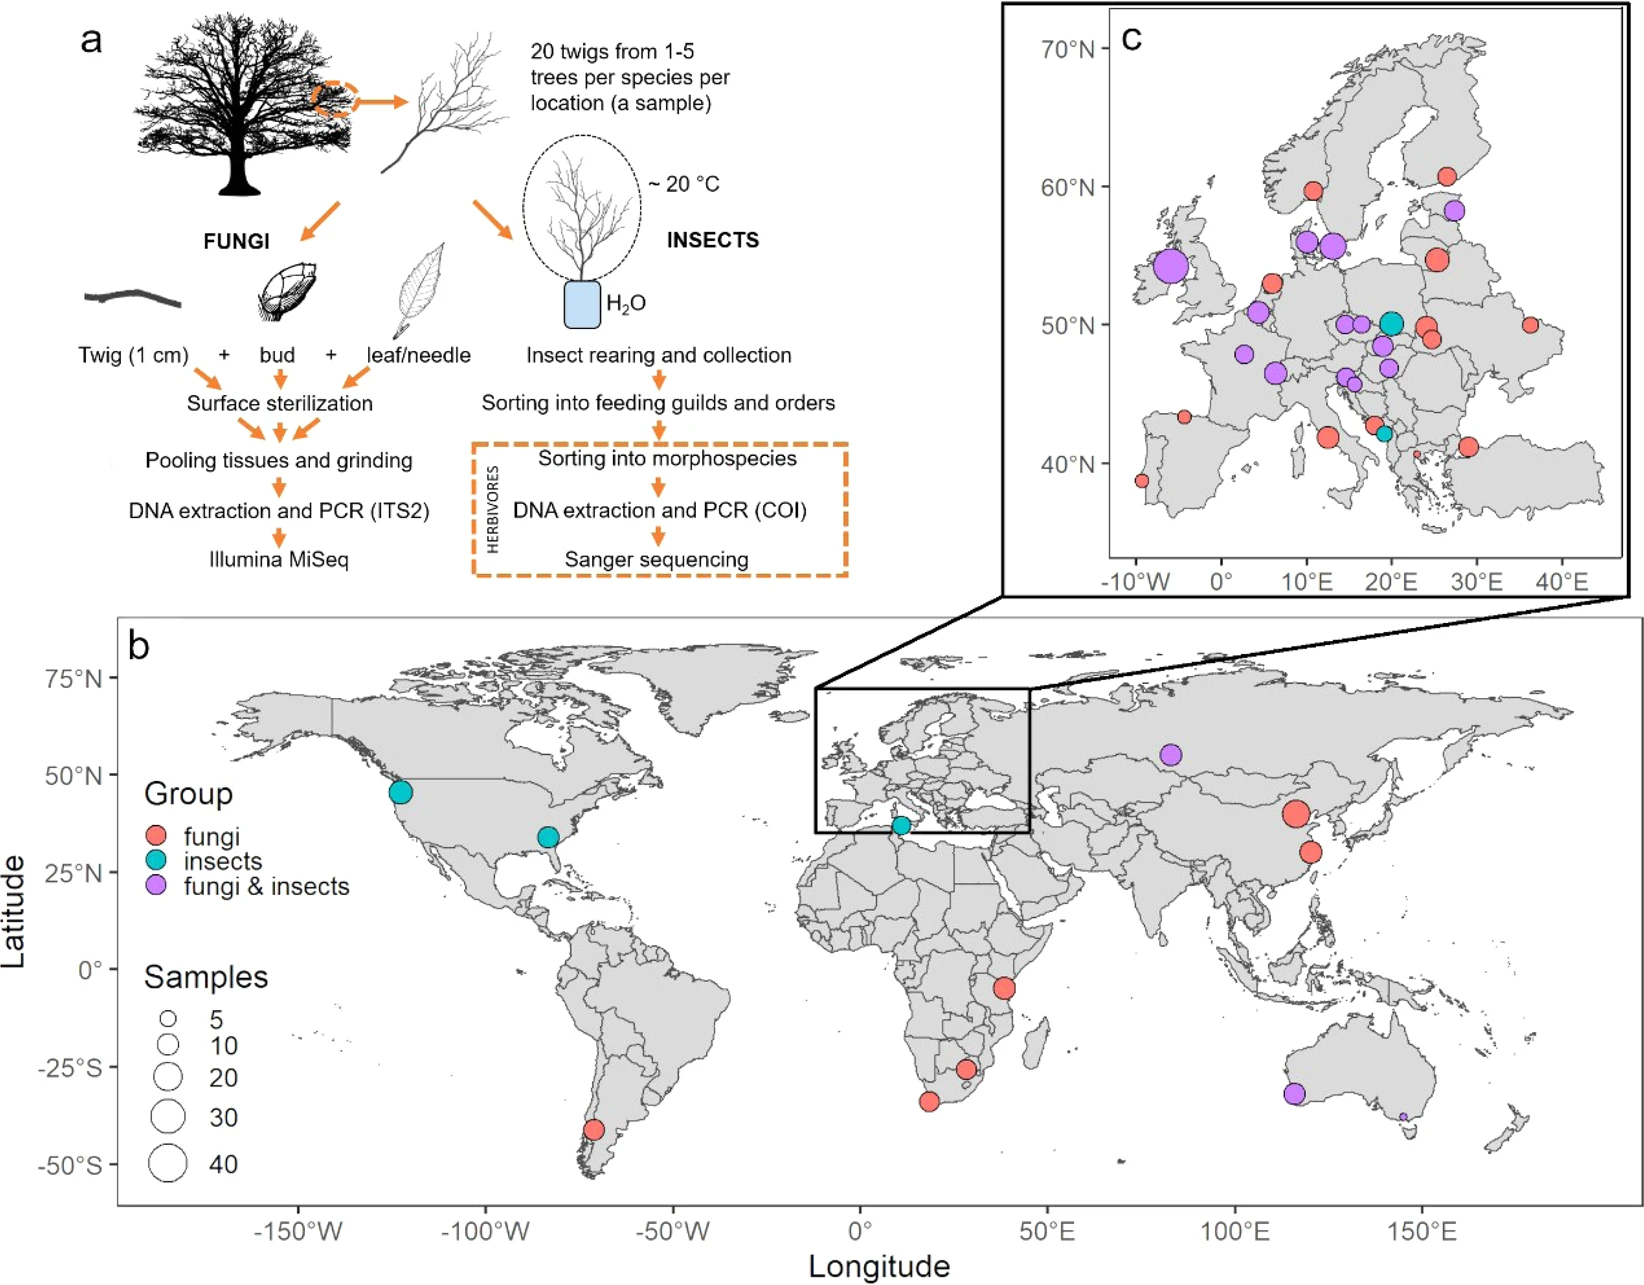 Worldwide diversity of endophytic fungi and insects associated with dormant tree twigs